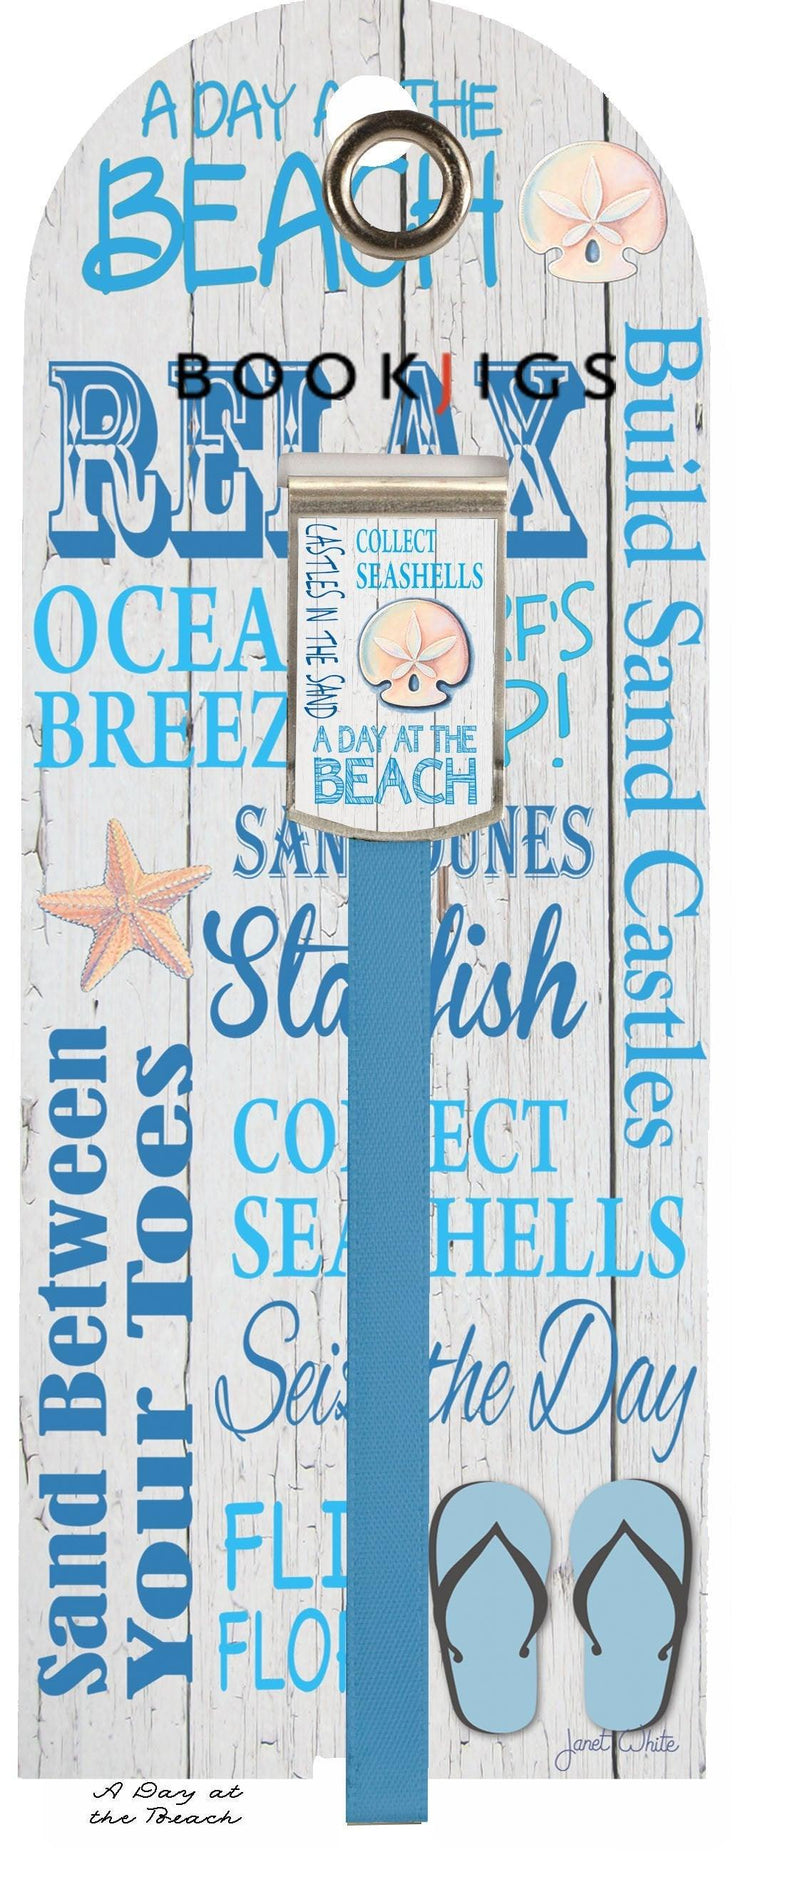 Coastal Bookjig: Day at the Beach - SpectrumStore SG